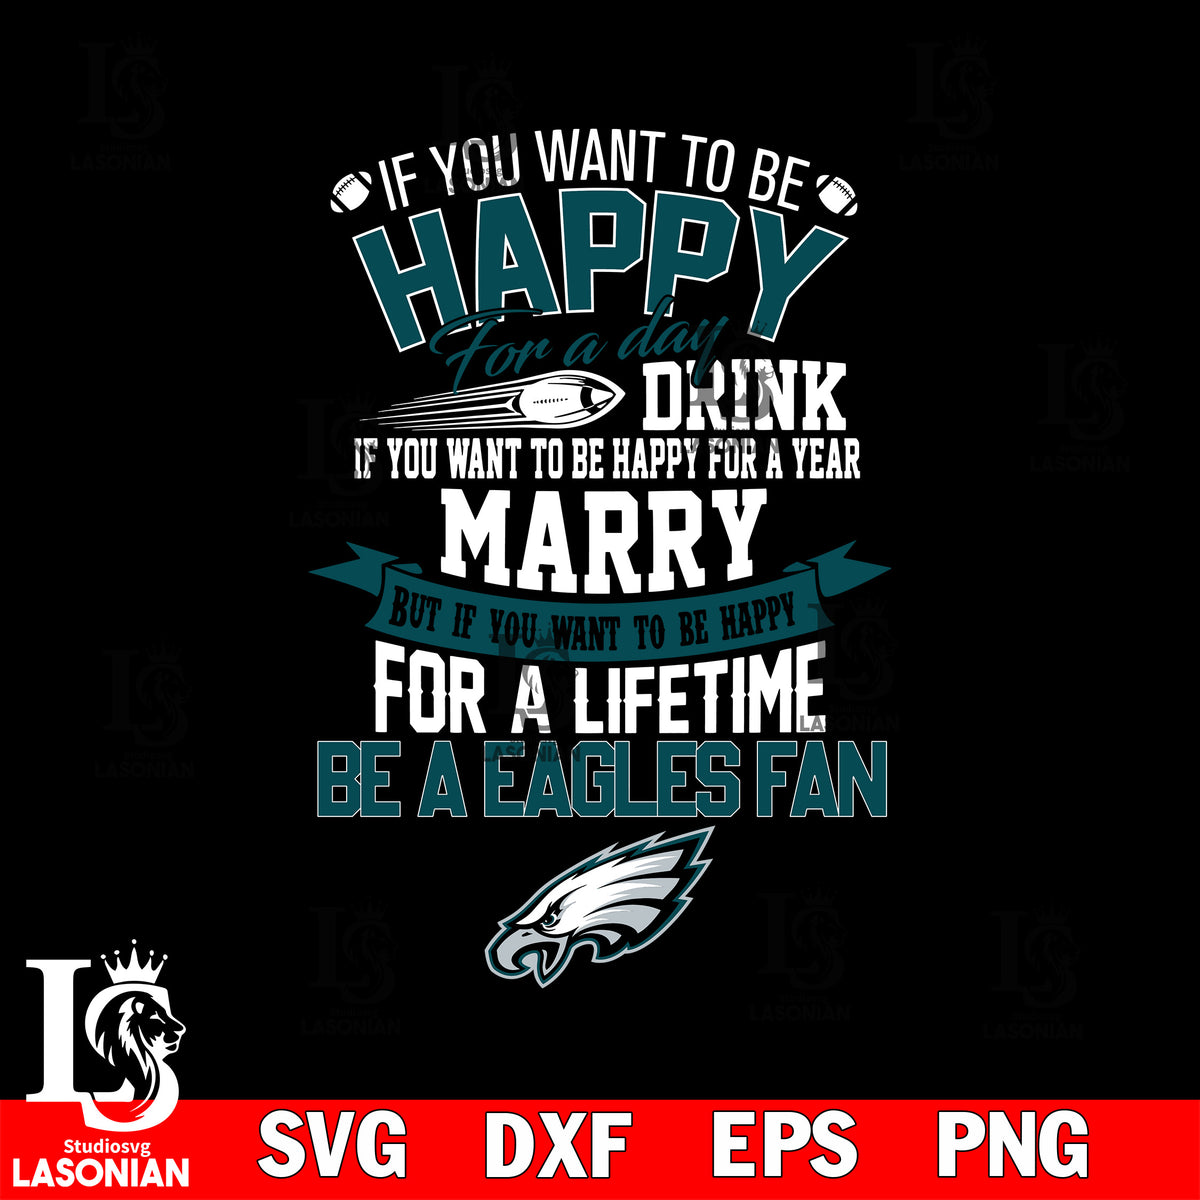 But if you want to be happy for a life time be a Philadelphia Eagles s –  lasoniansvg